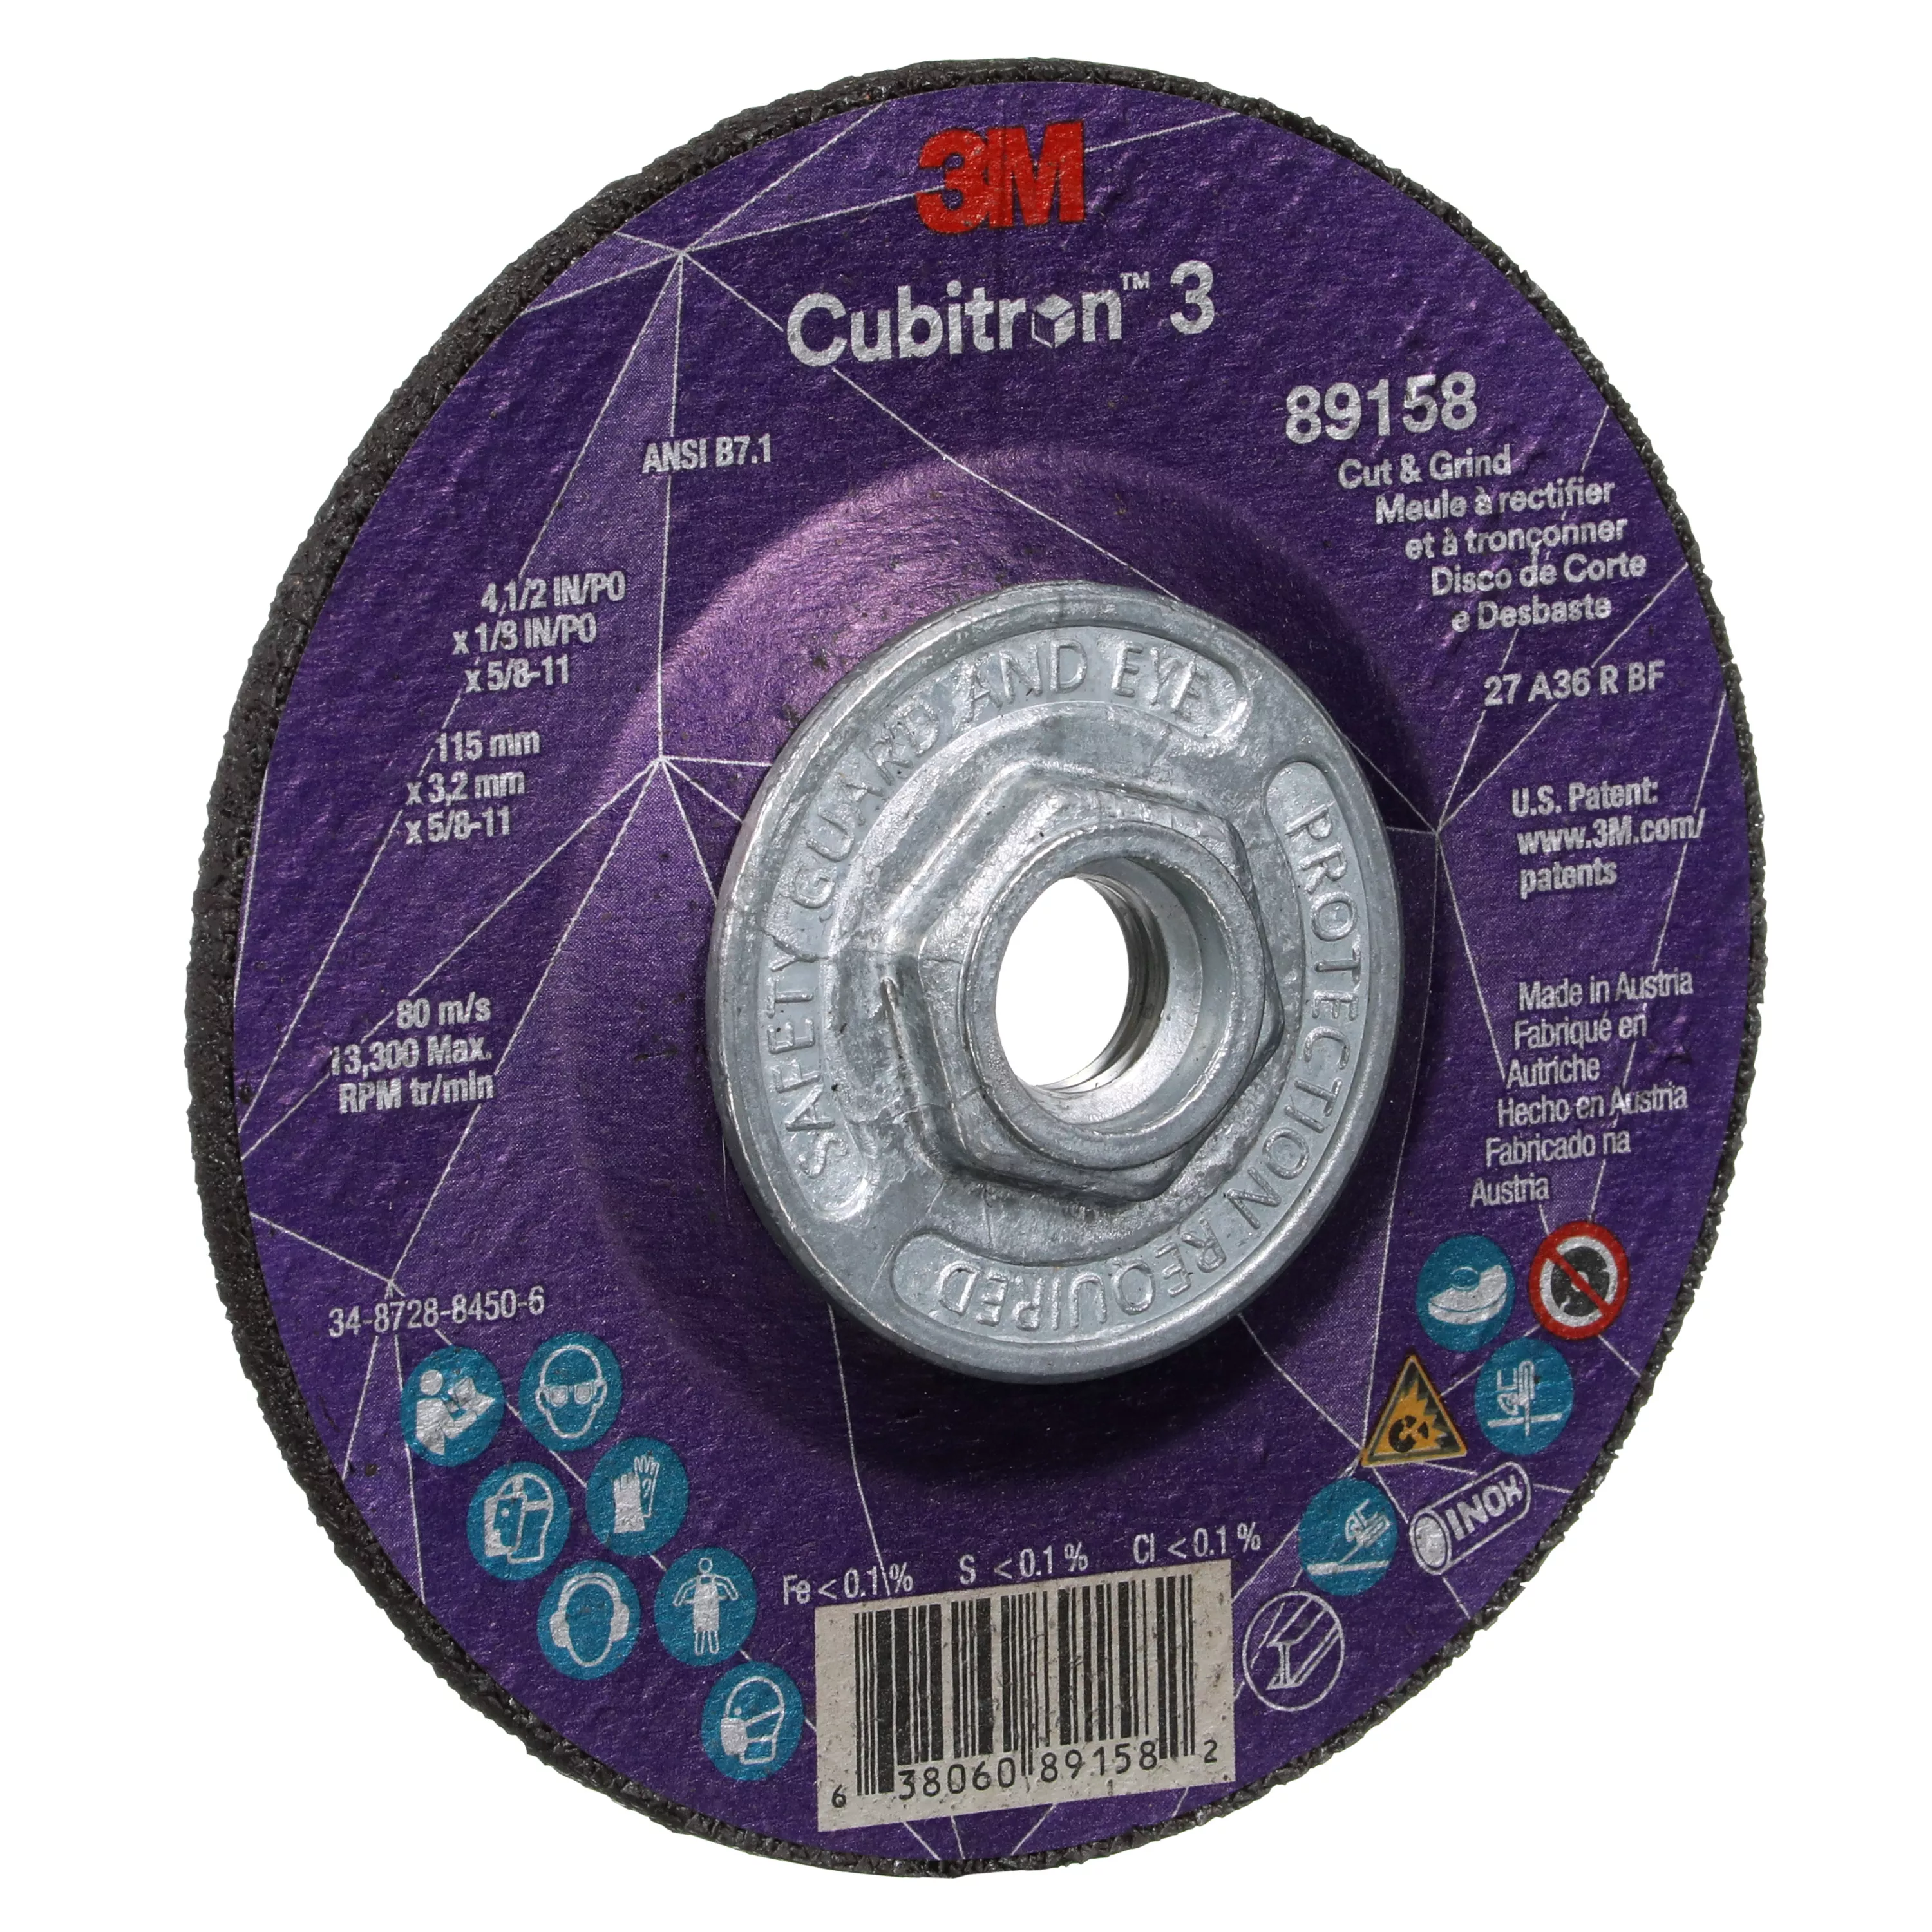 Product Number 89158 | 3M™ Cubitron™ 3 Cut and Grind Wheel